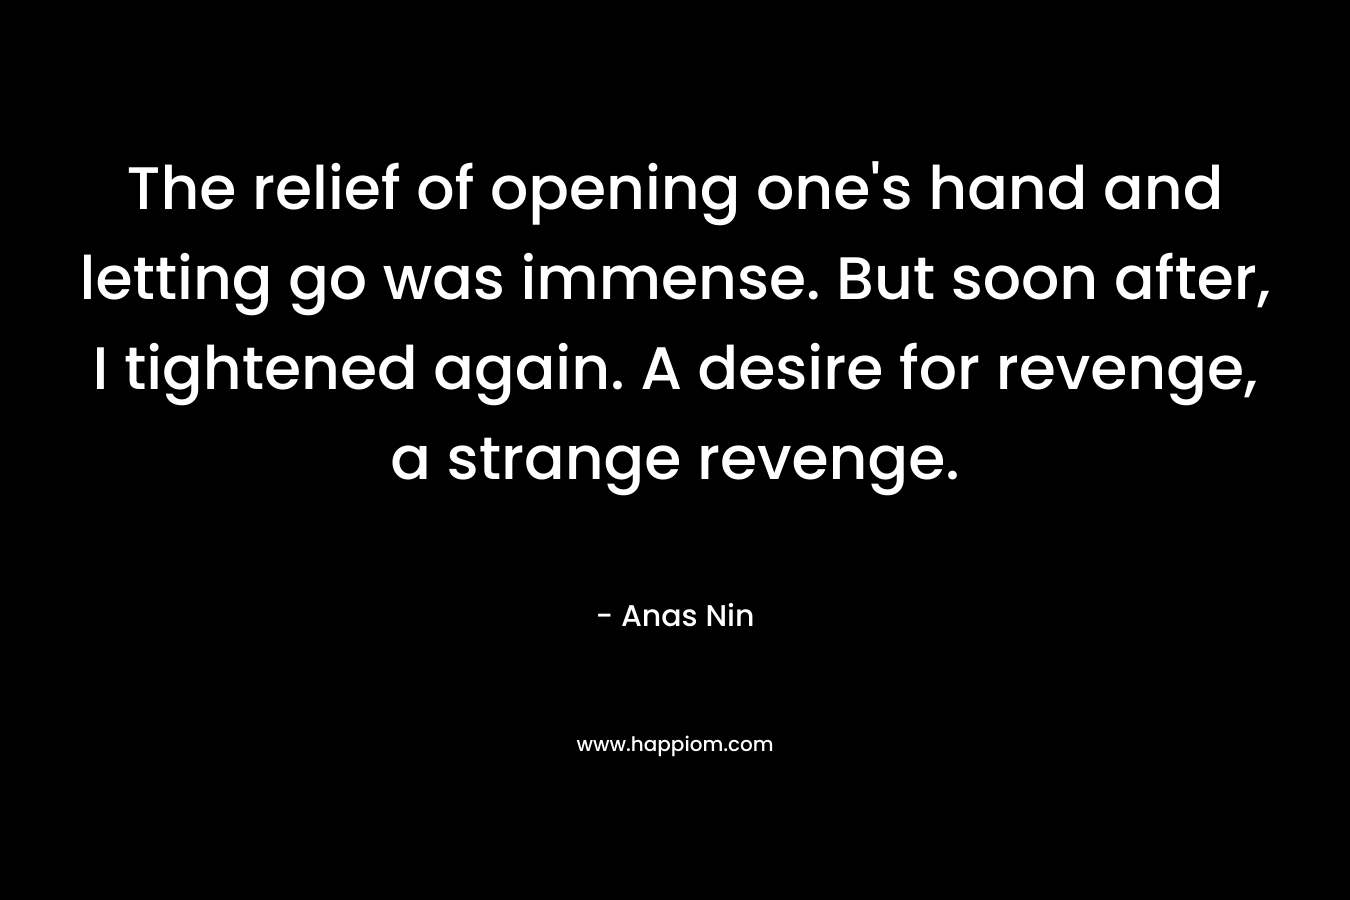 The relief of opening one's hand and letting go was immense. But soon after, I tightened again. A desire for revenge, a strange revenge.